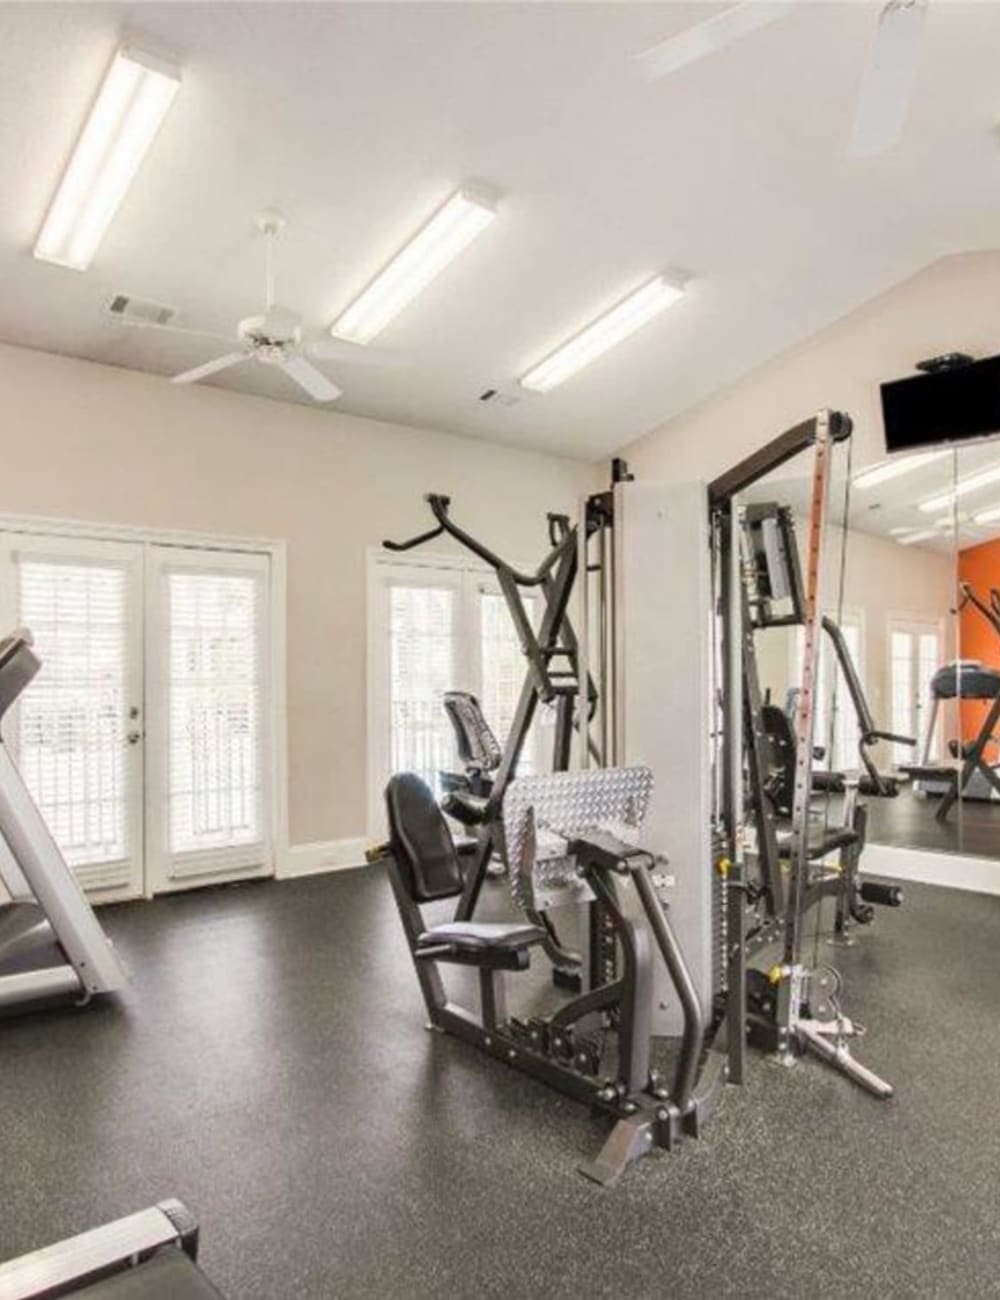 Exercise equipment in the fitness center at The Gables in Ridgeland, Mississippi